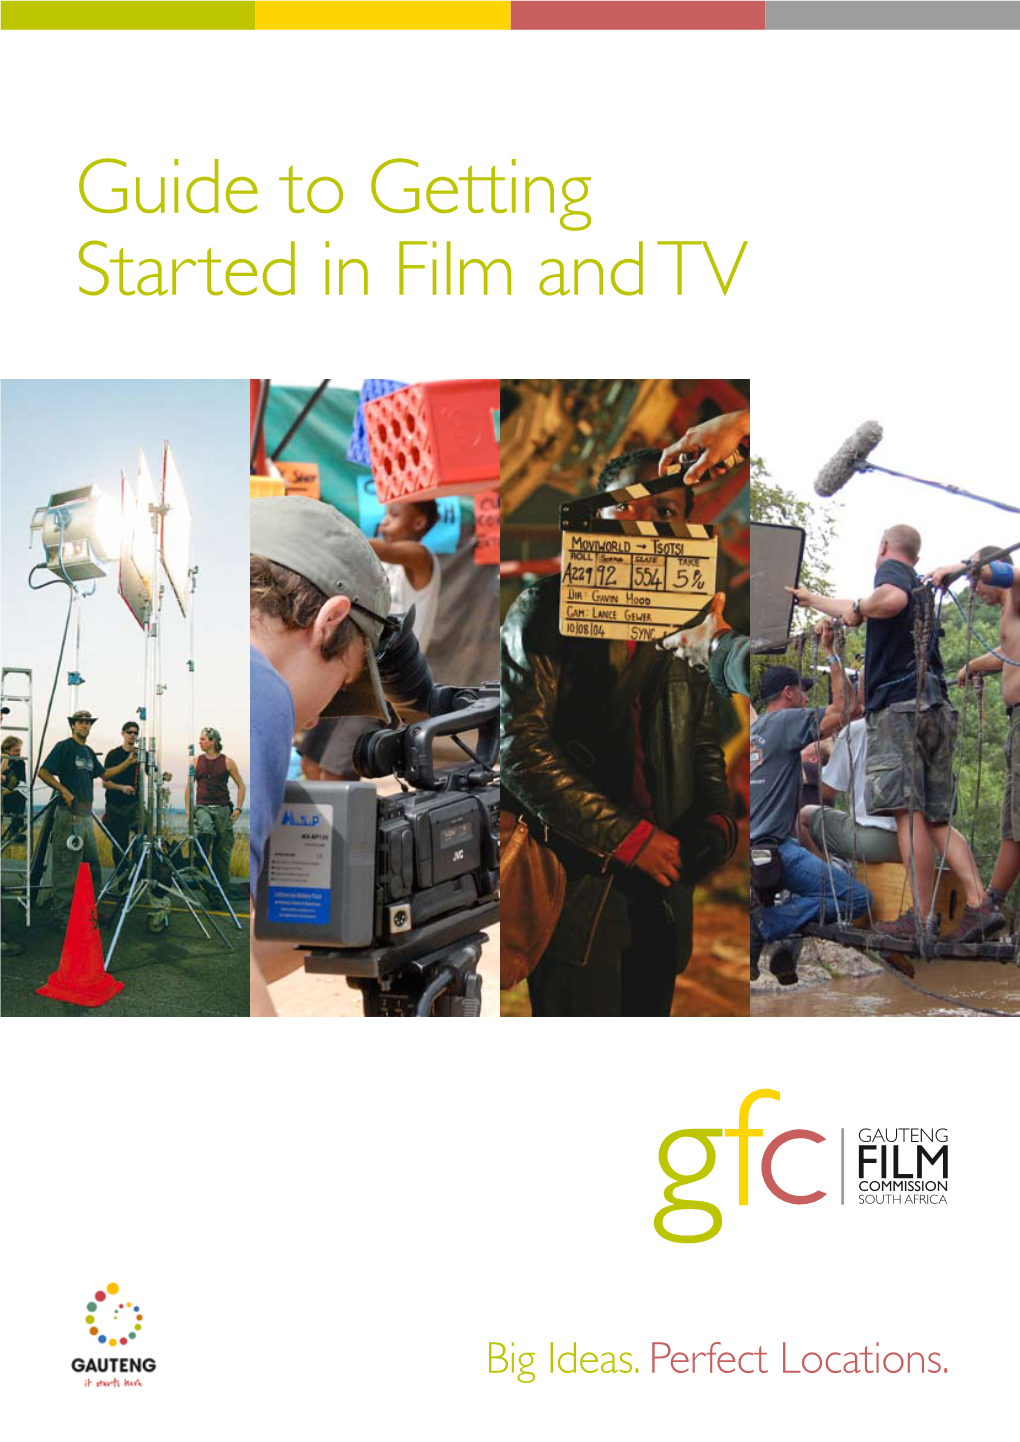 Guide to Getting Started in Film and TV